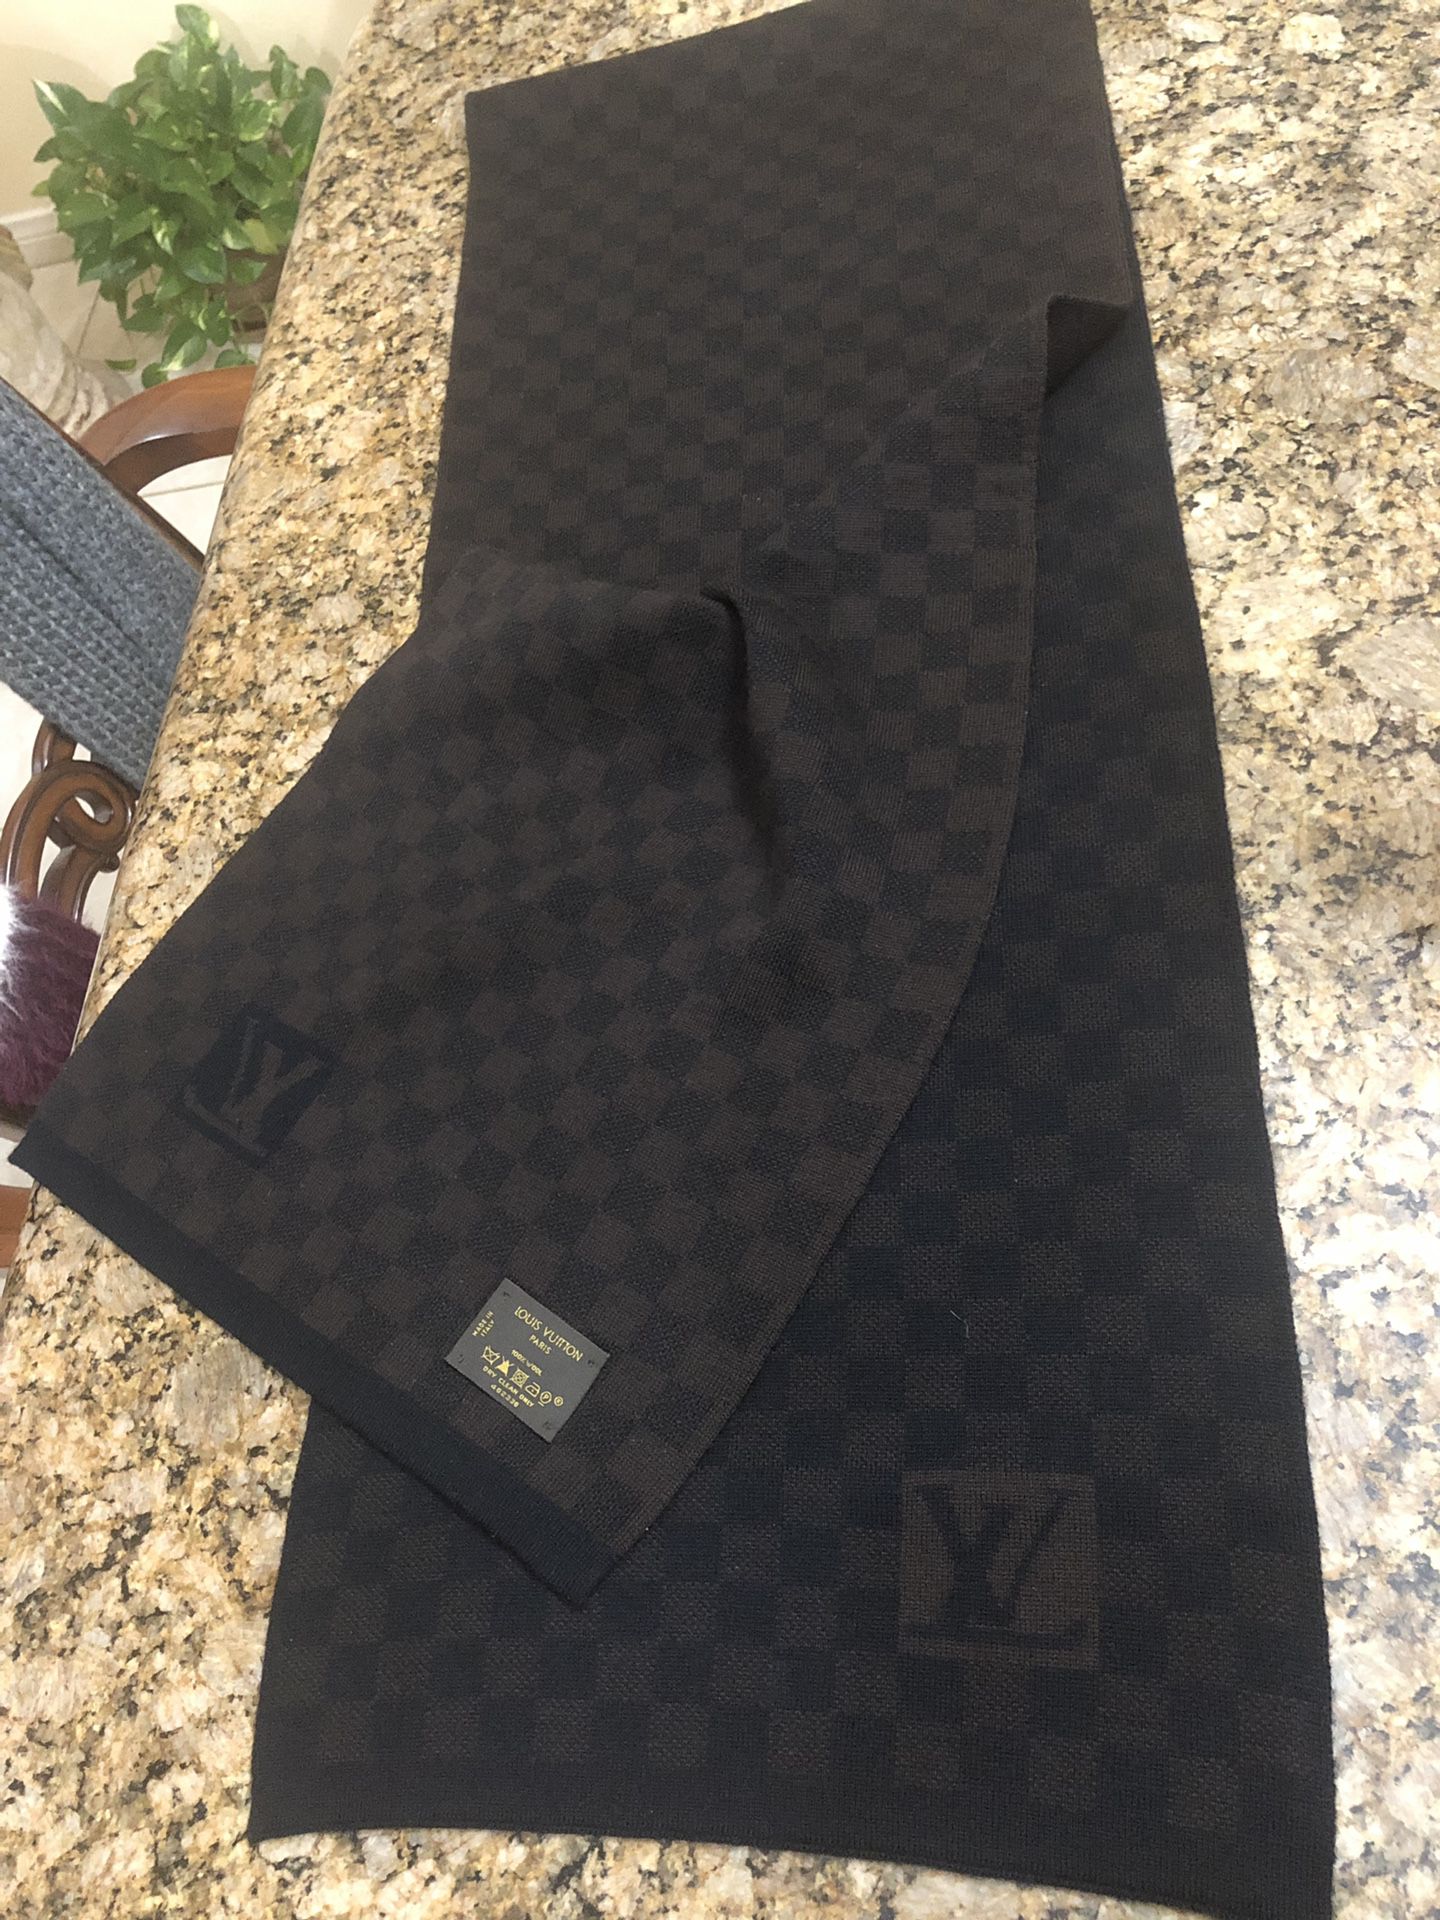 LV Knit Scarf for Sale in Bedford Park, IL - OfferUp